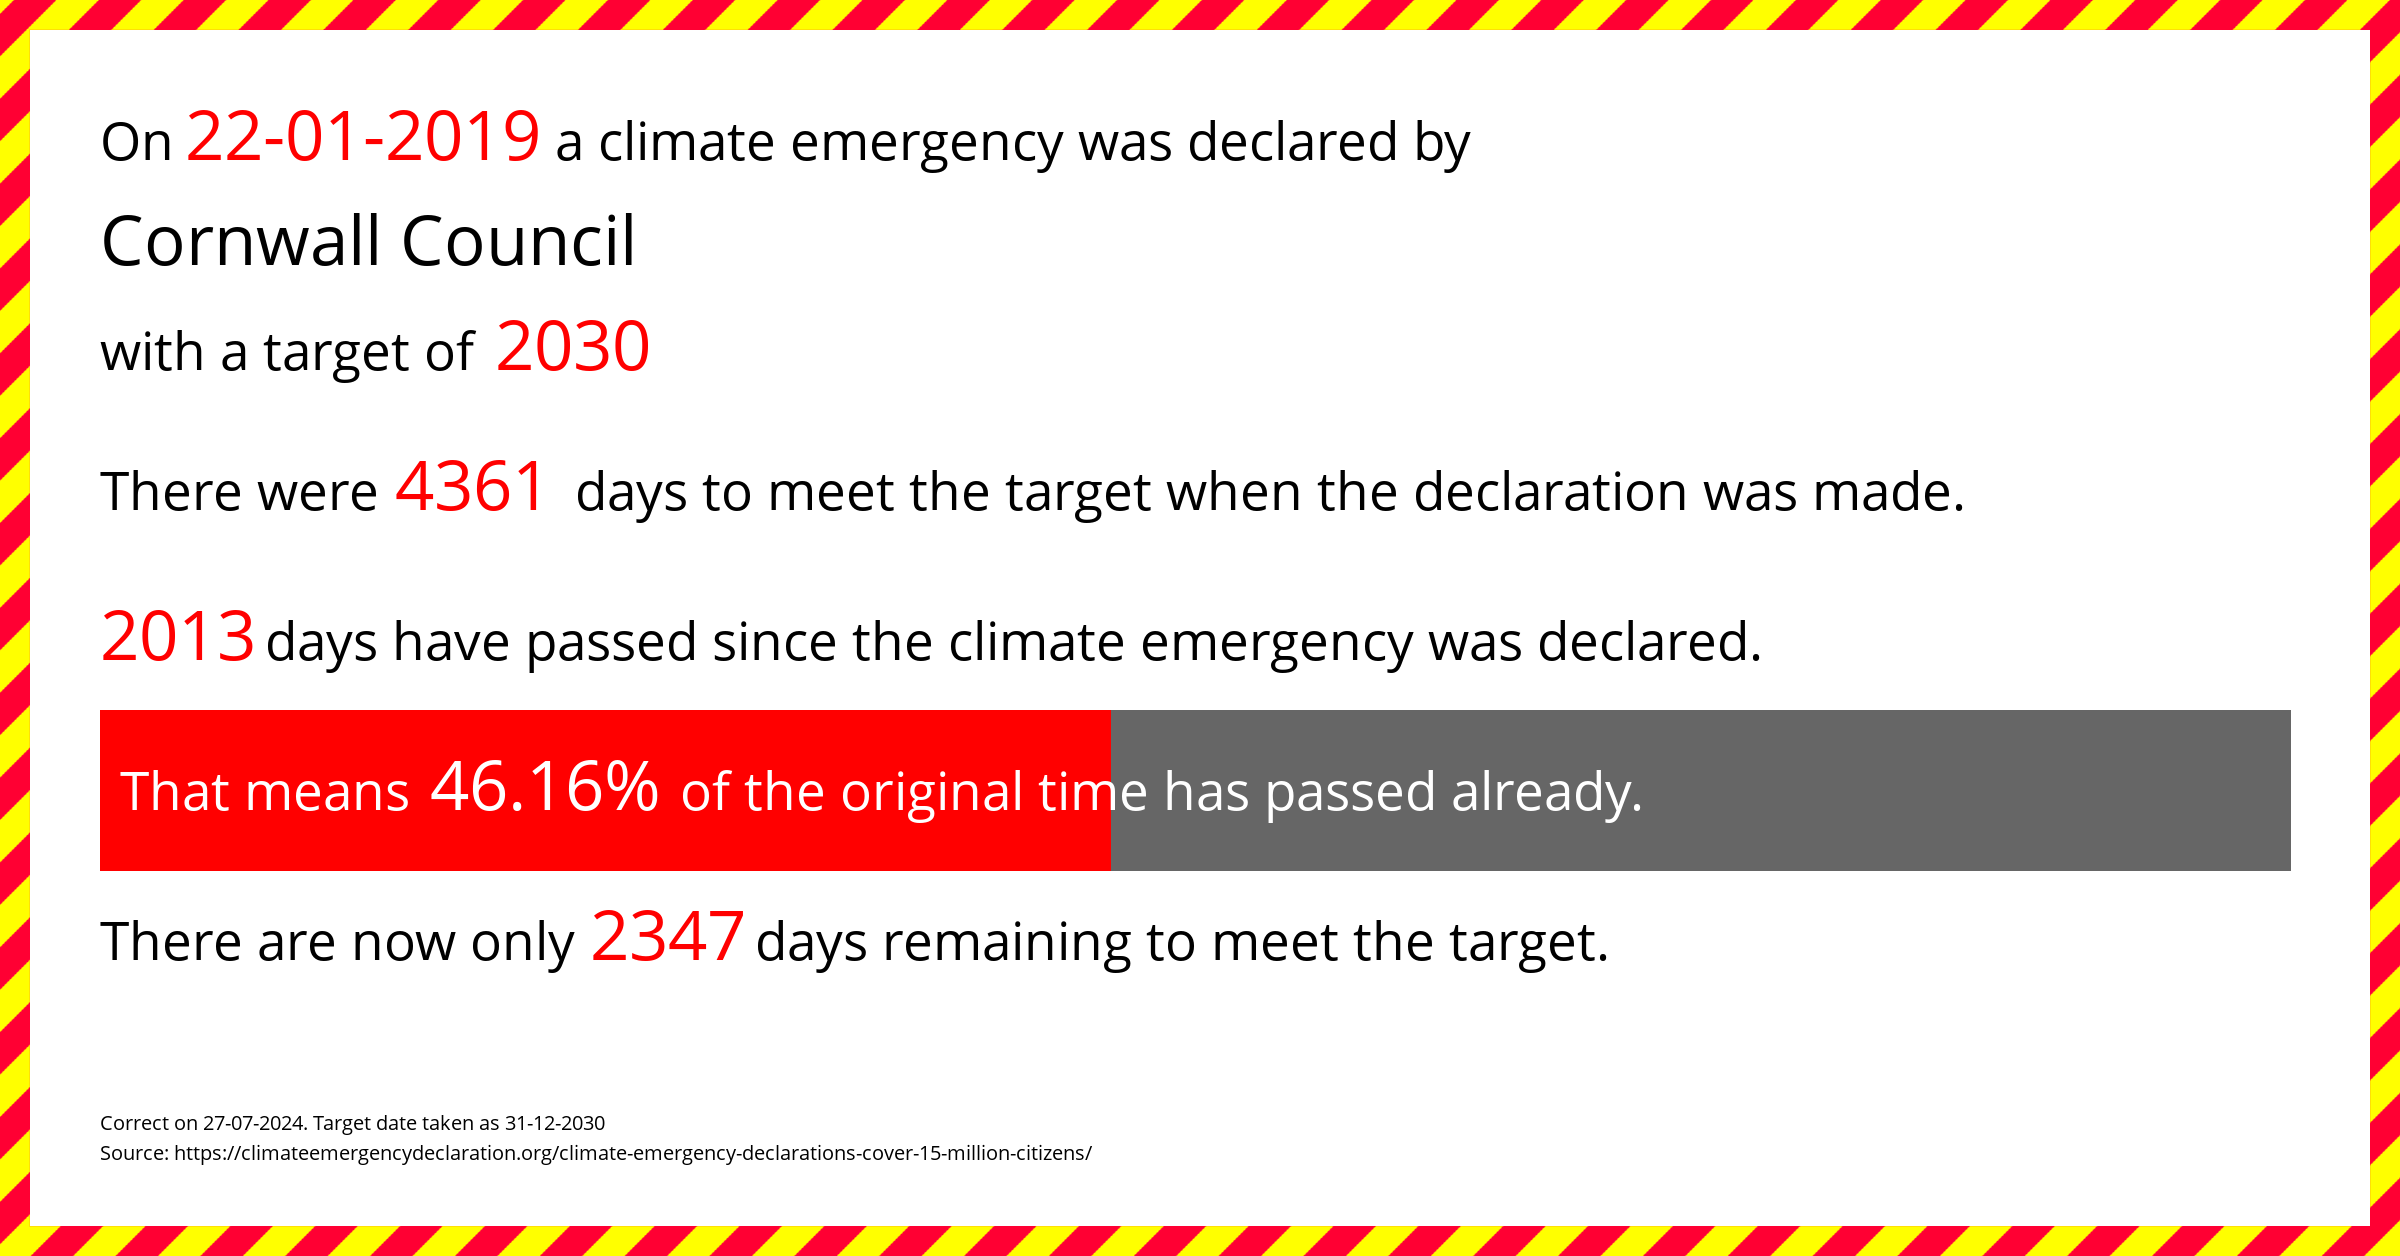 Cornwall Council declared a Climate emergency on Tuesday 22nd January 2019, with a target of 2030.